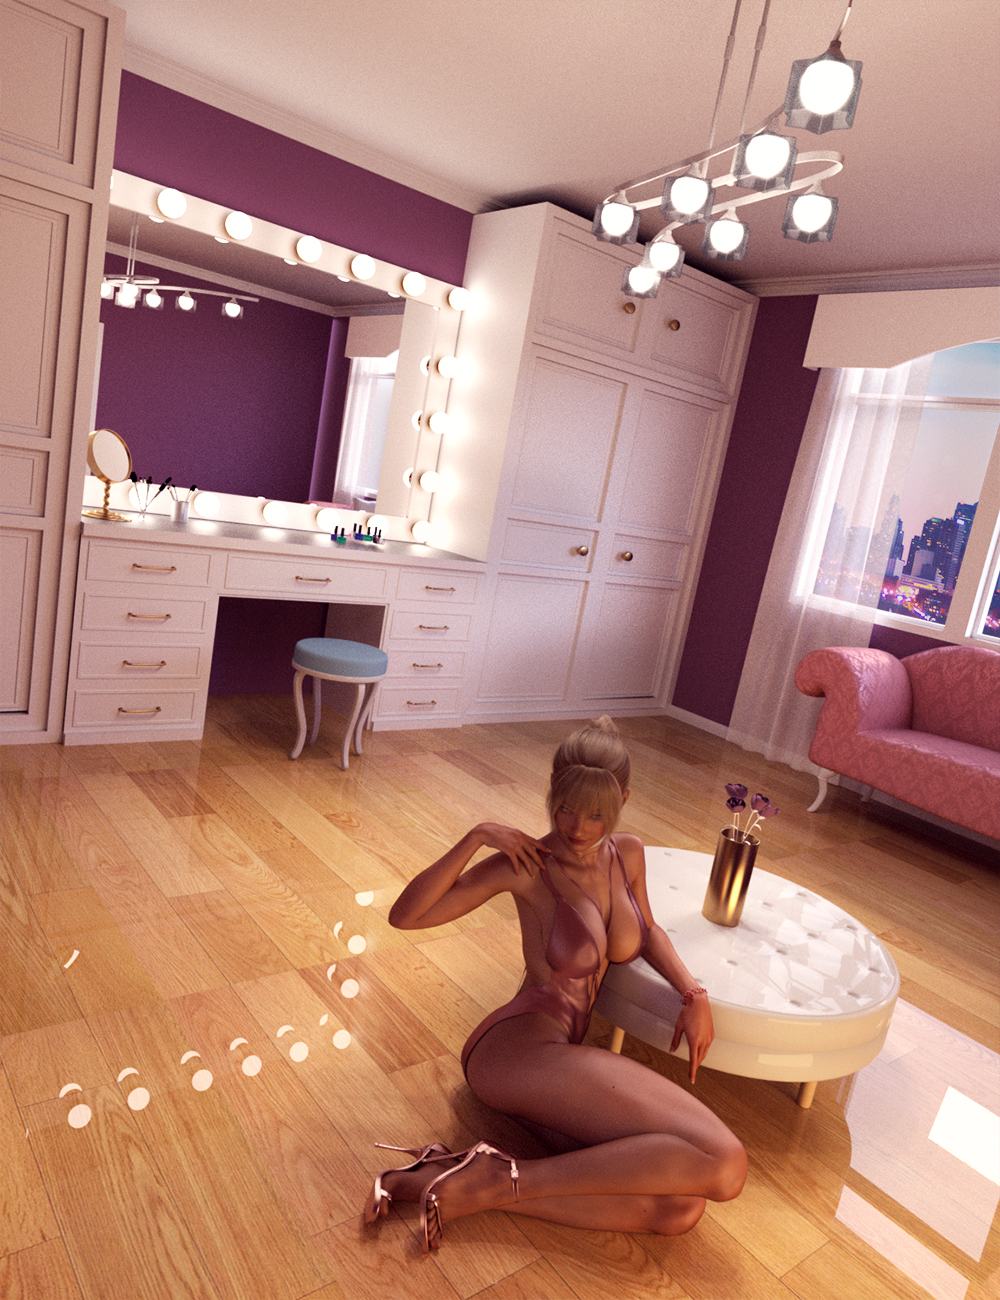 Vanity Room Environment and Poses by: Val3dart, 3D Models by Daz 3D